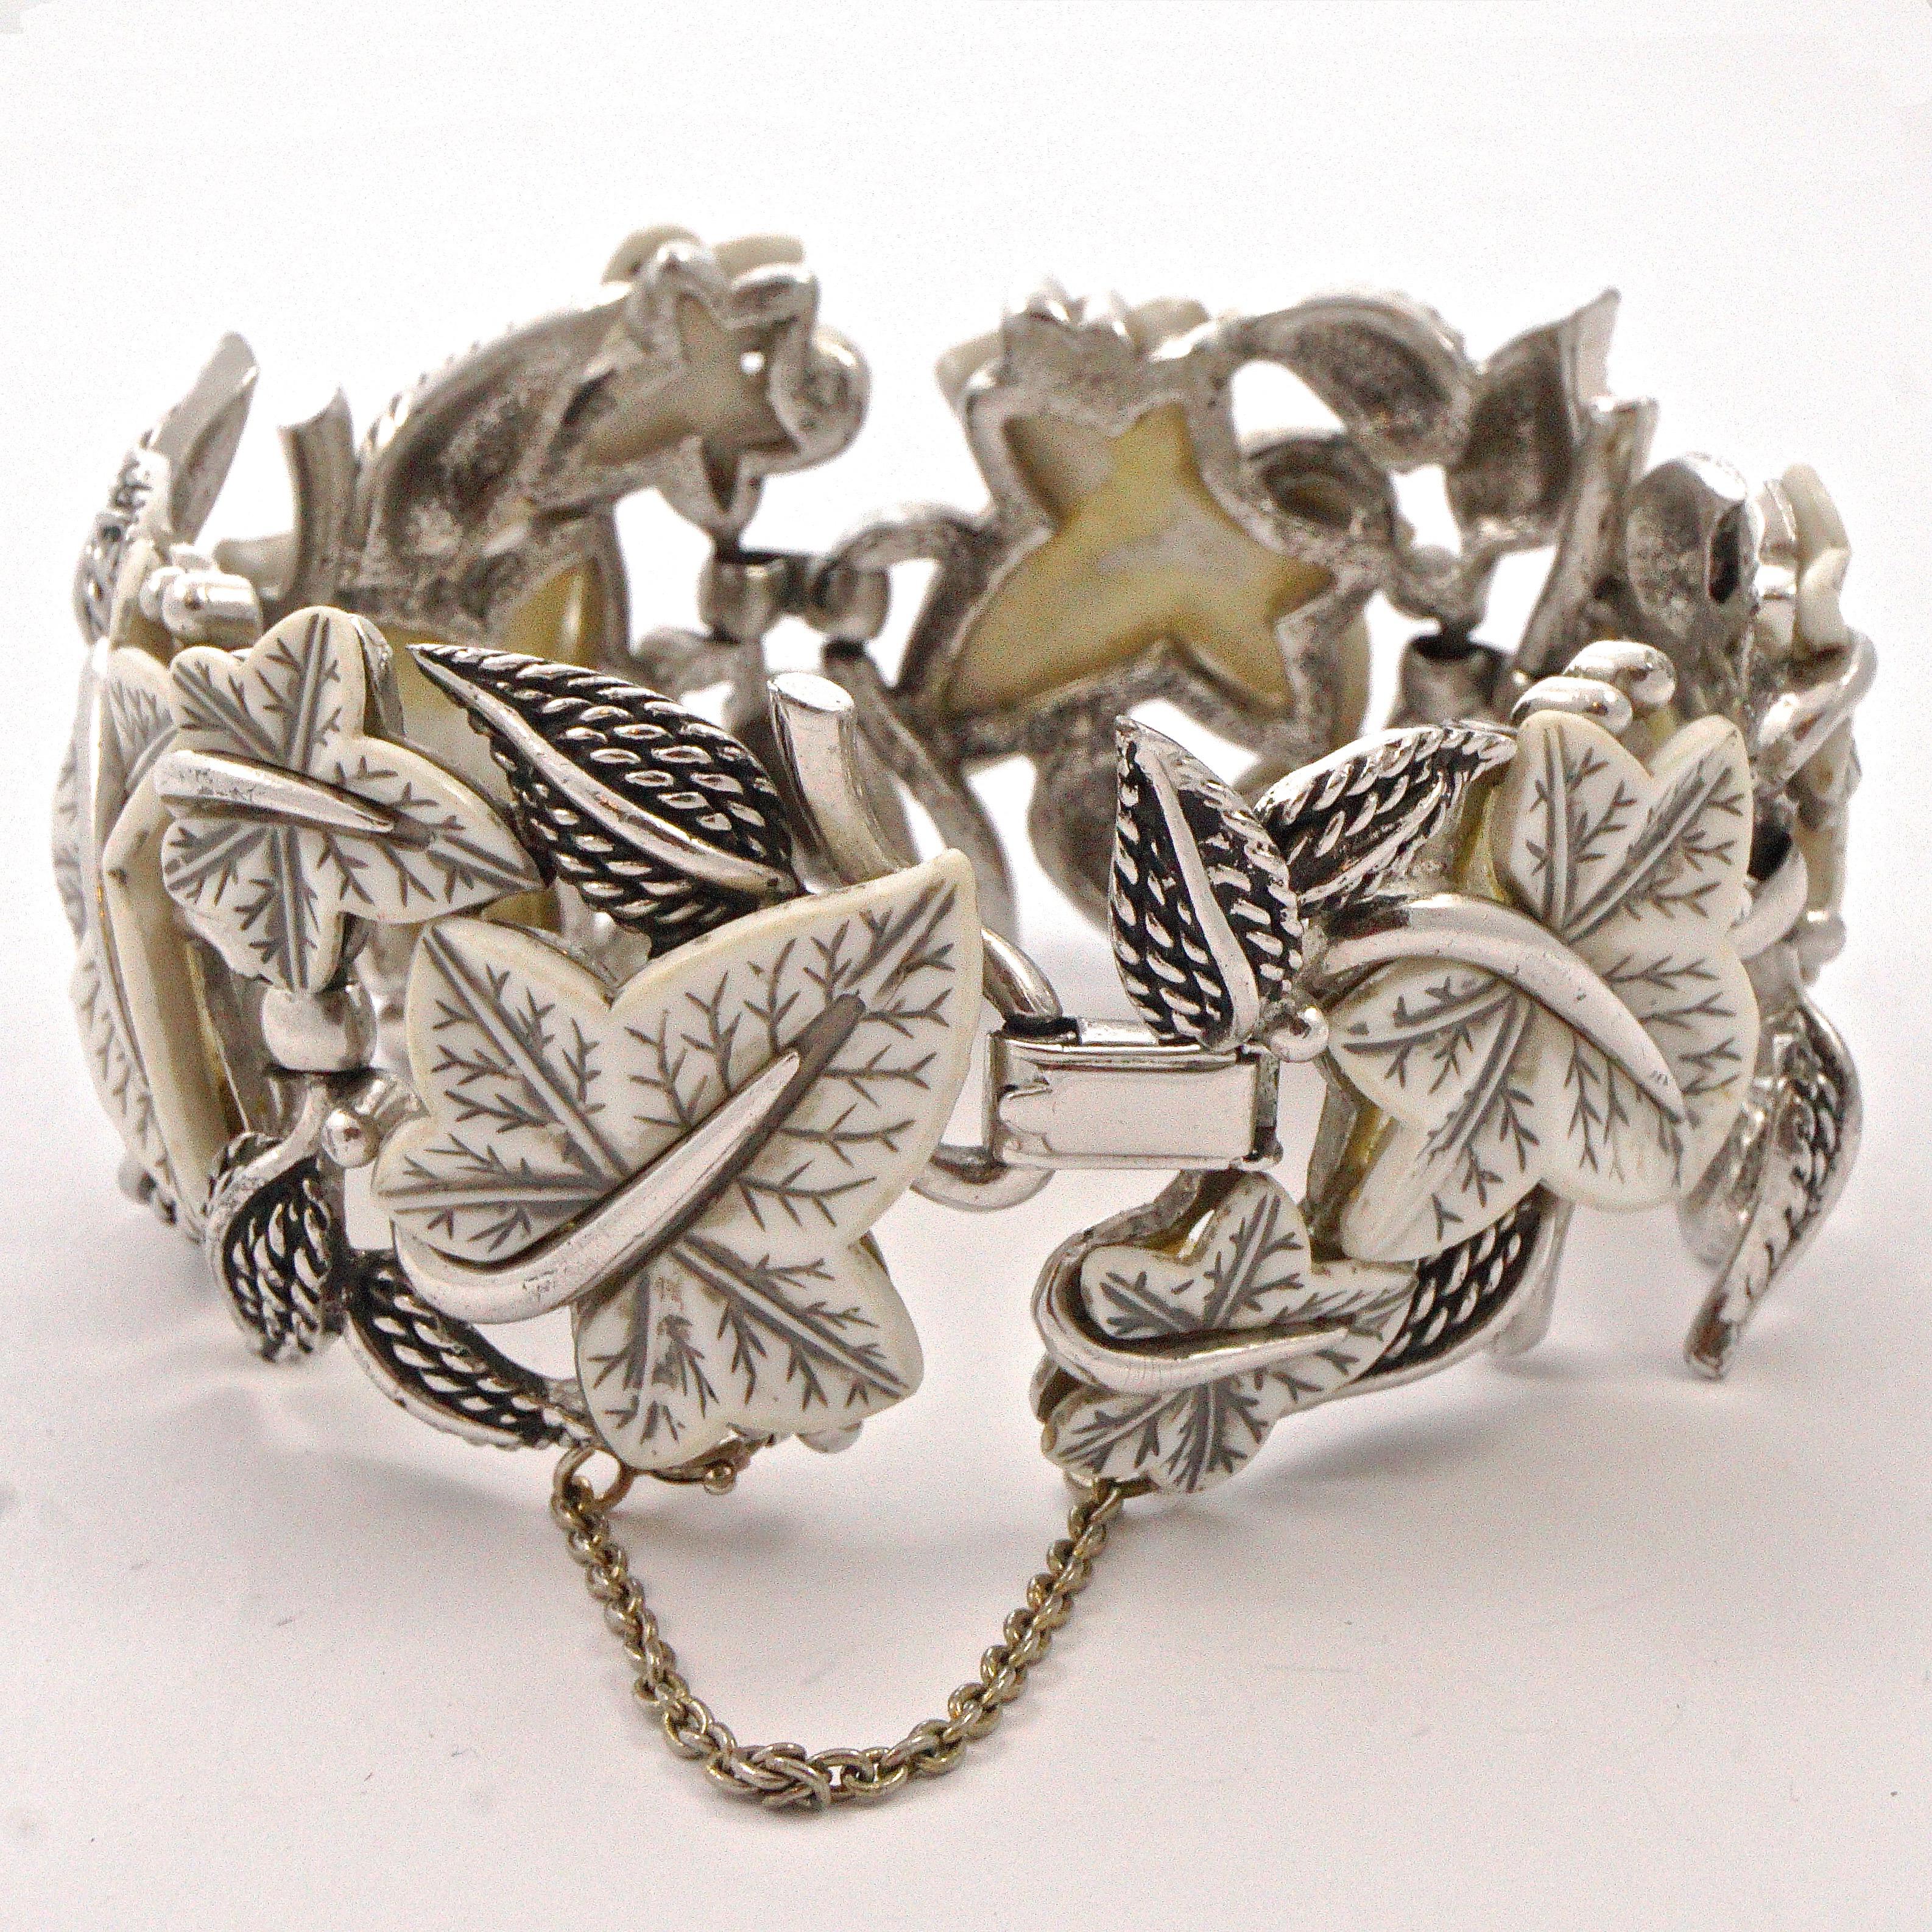 Boucher Silver Plated and White Glass Ivy Leaves Link Bracelet circa 1950s For Sale 3